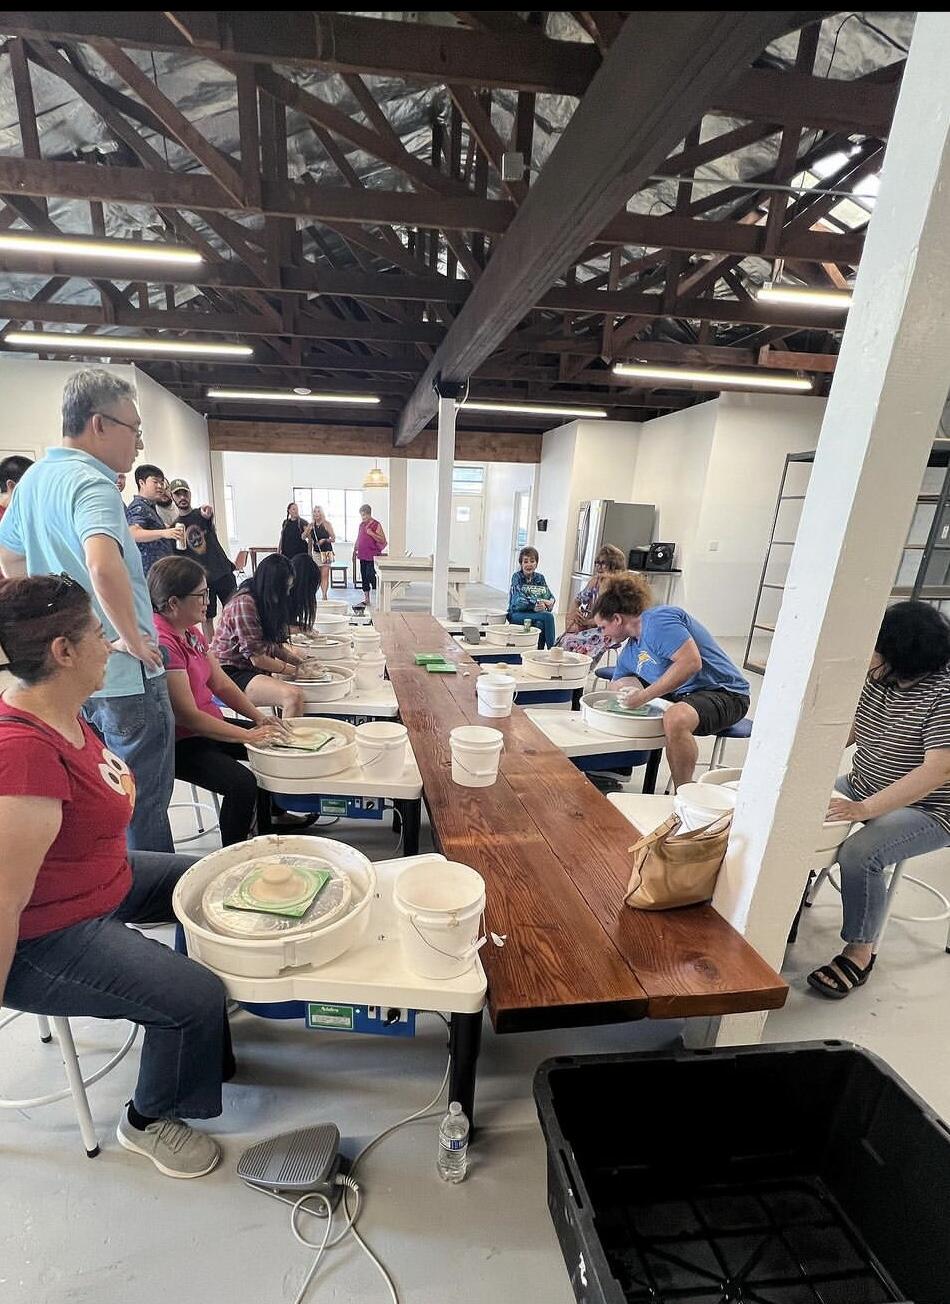 Claytivity Pottery Studio Now Open in Burbank with Classes